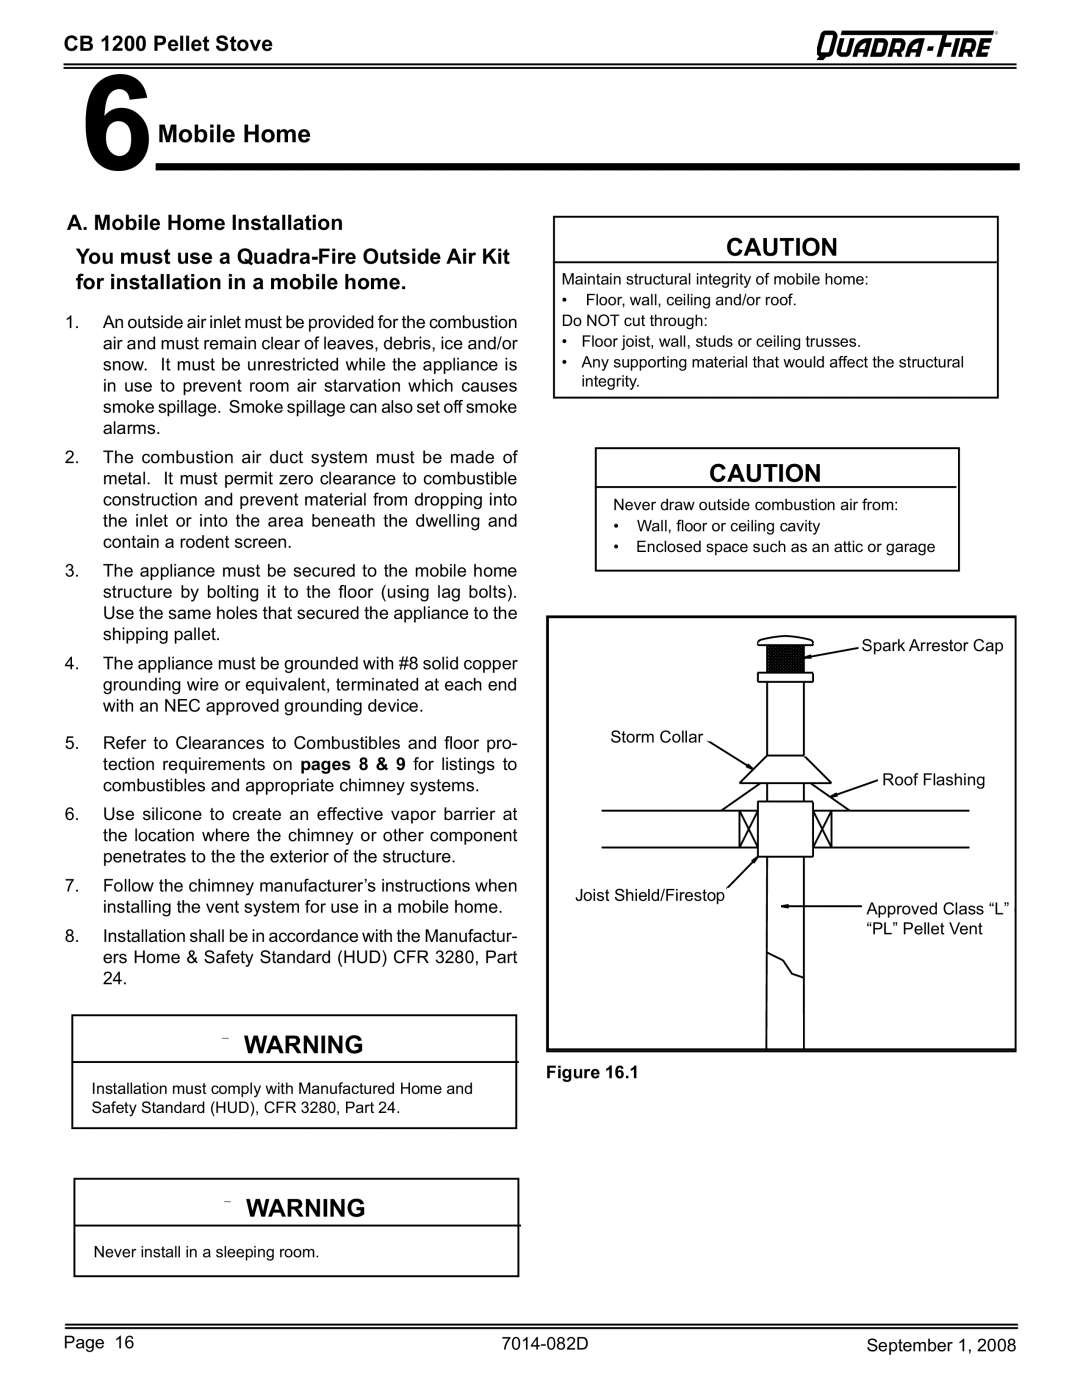 Hearth and Home Technologies CB1200-B owner manual 6Mobile Home 